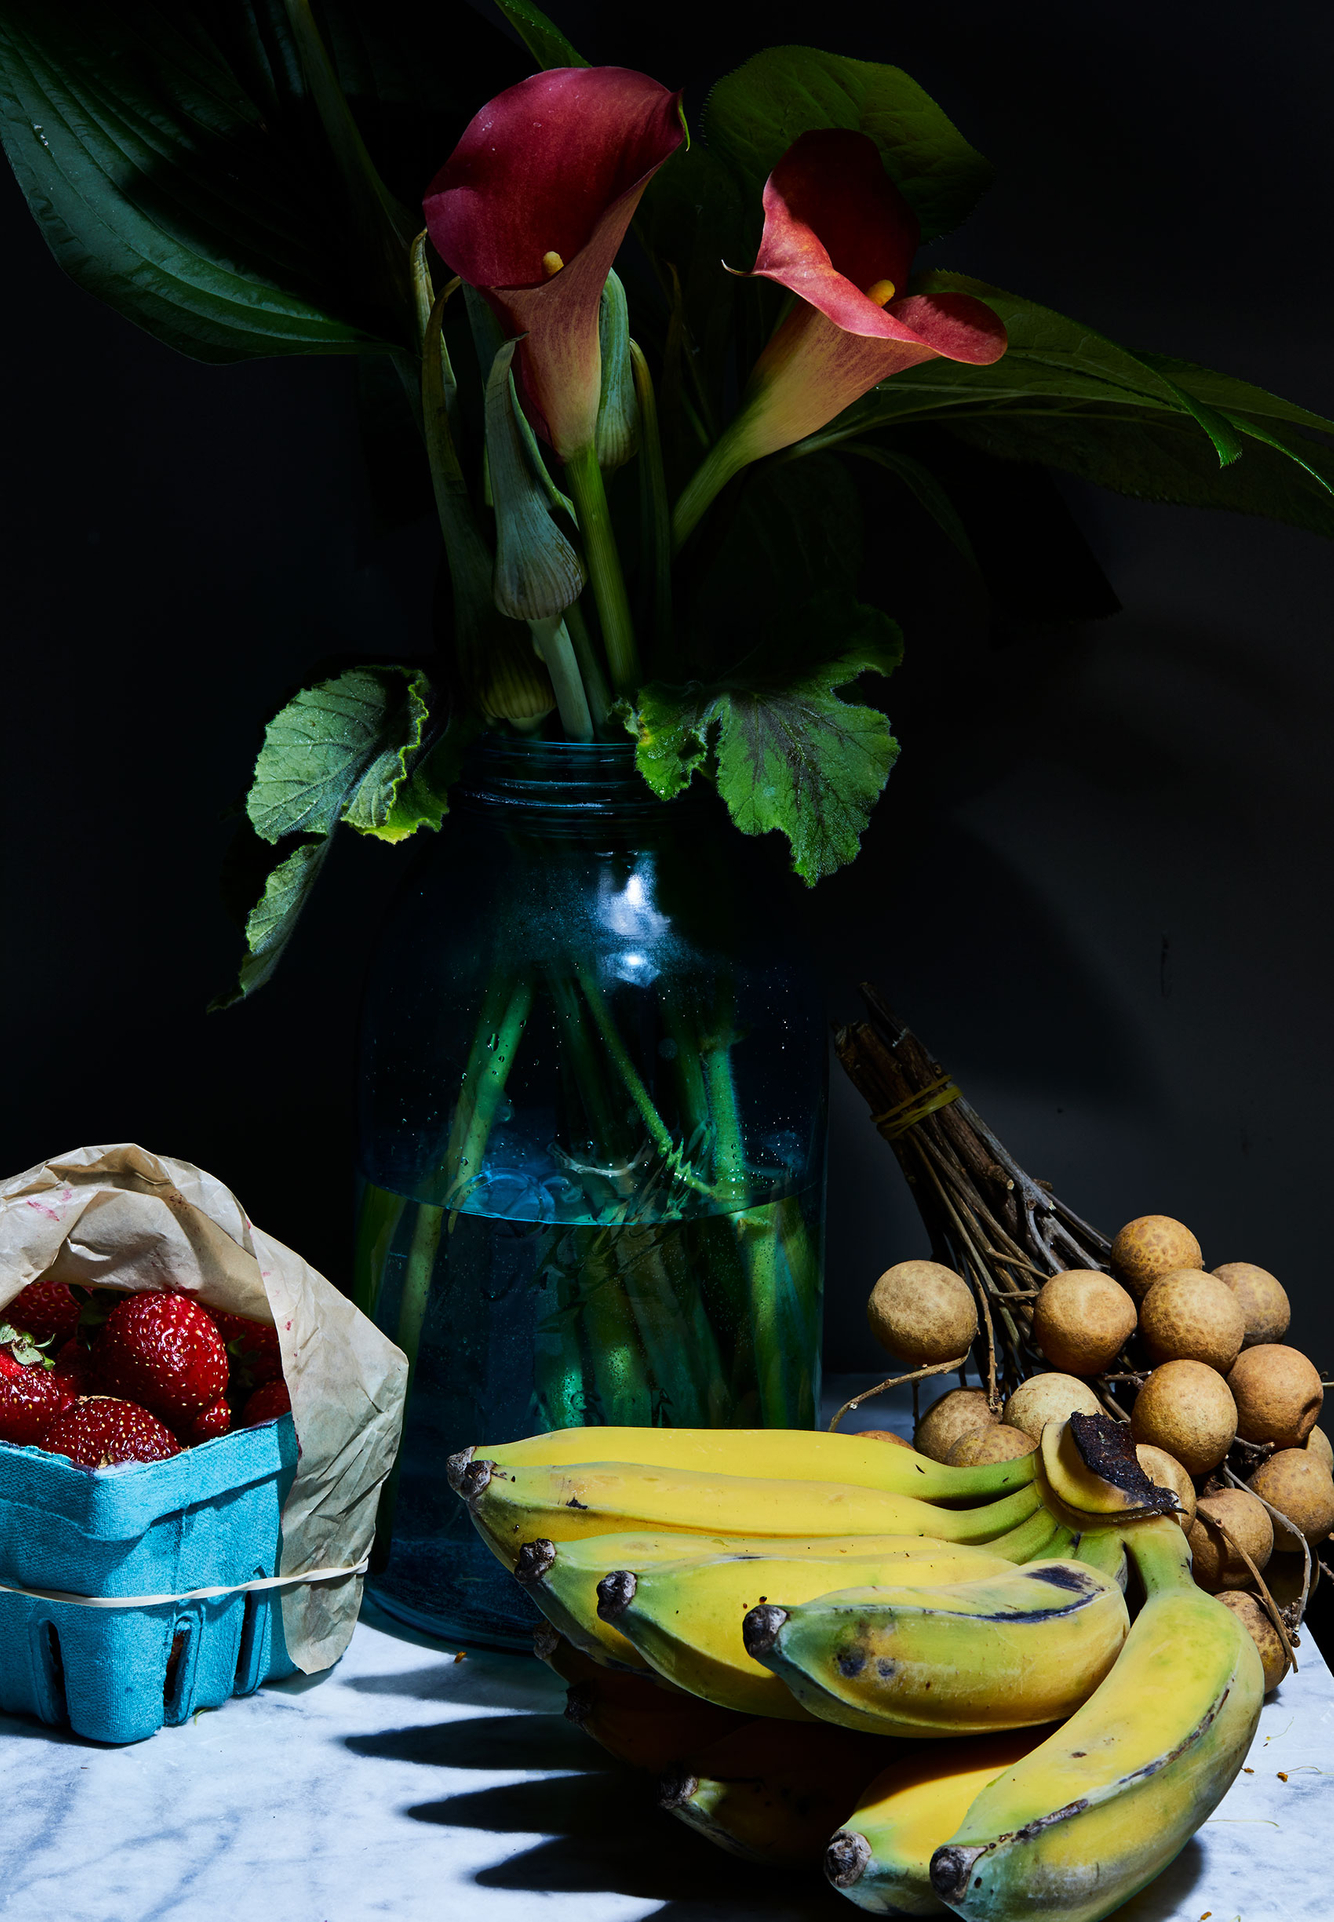 Lillies and fruit on tabletop